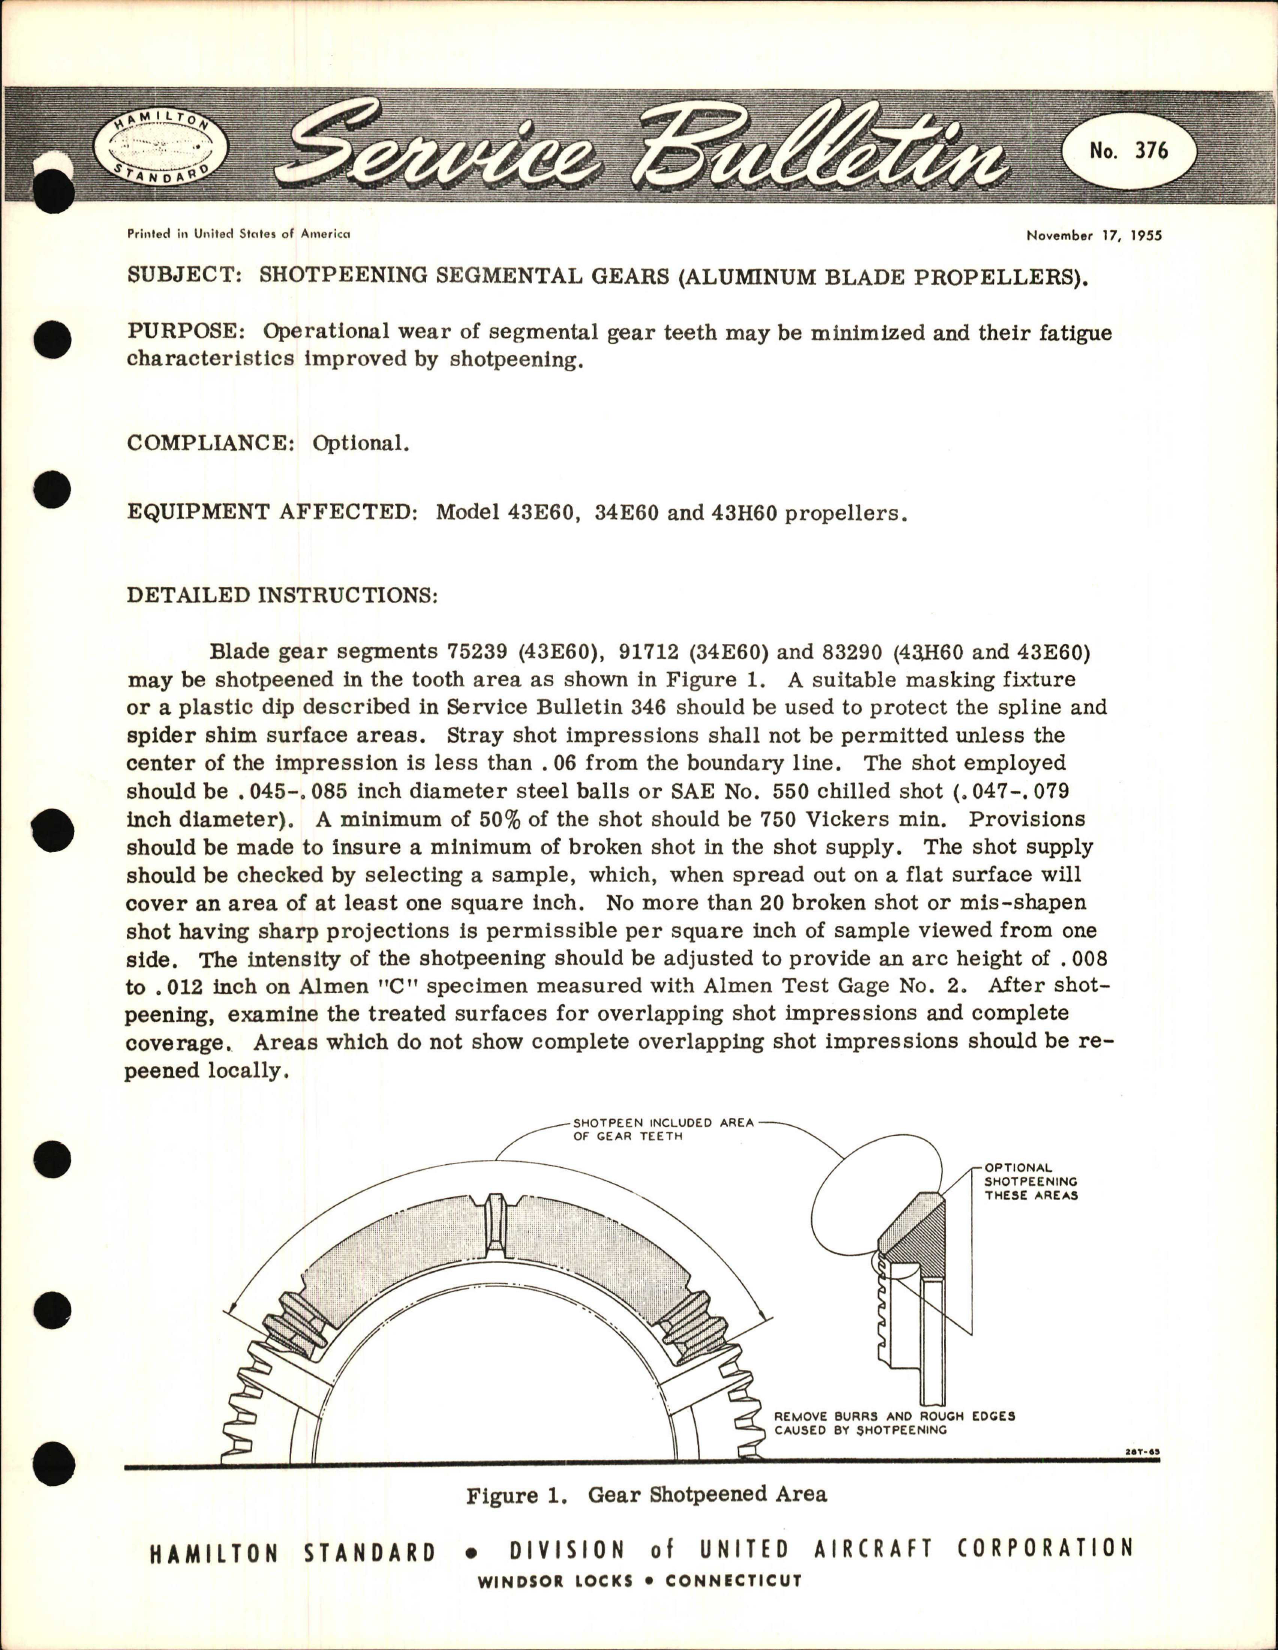 Sample page 1 from AirCorps Library document: Shotpeening Segmental Gears (Aluminum Blade Propellers) 